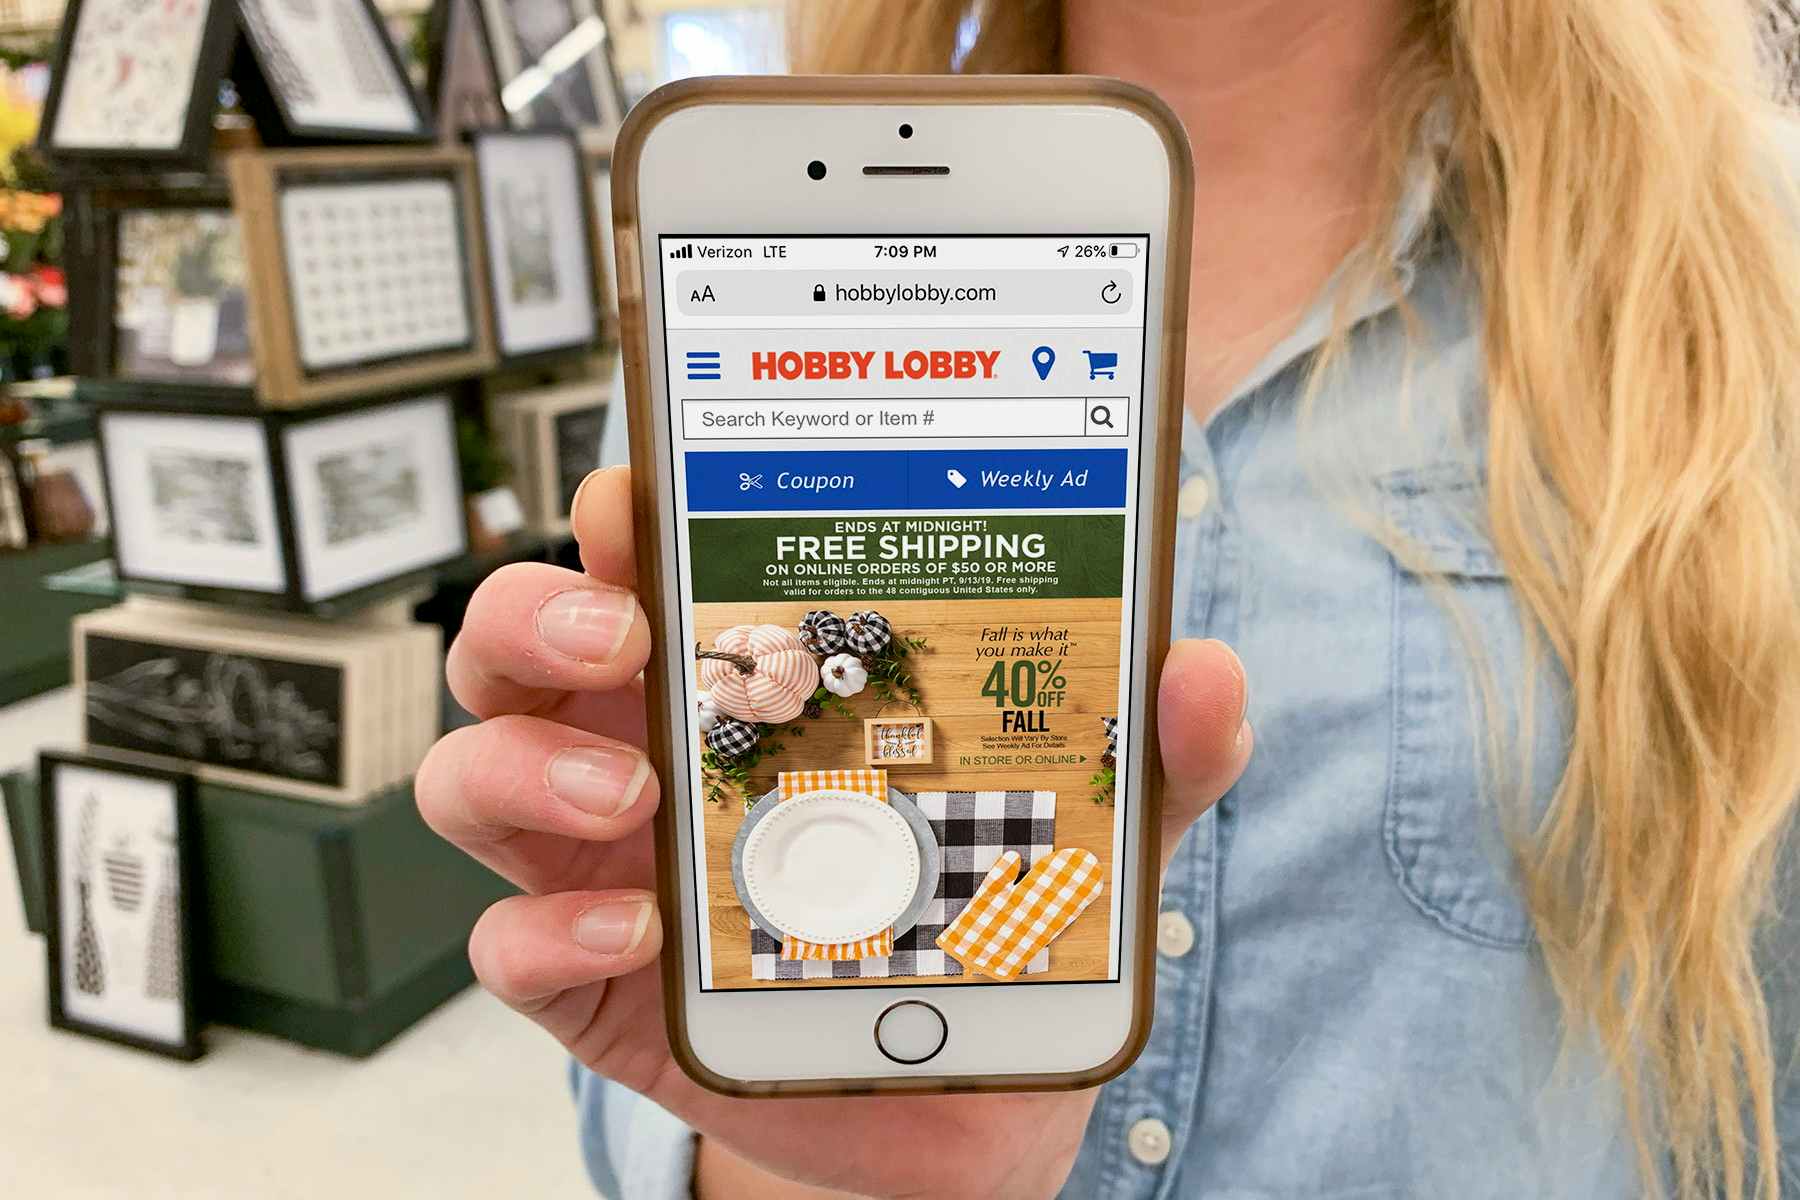 A cell phone screen showing Hobby Lobby's home page featuring a free shipping offer.